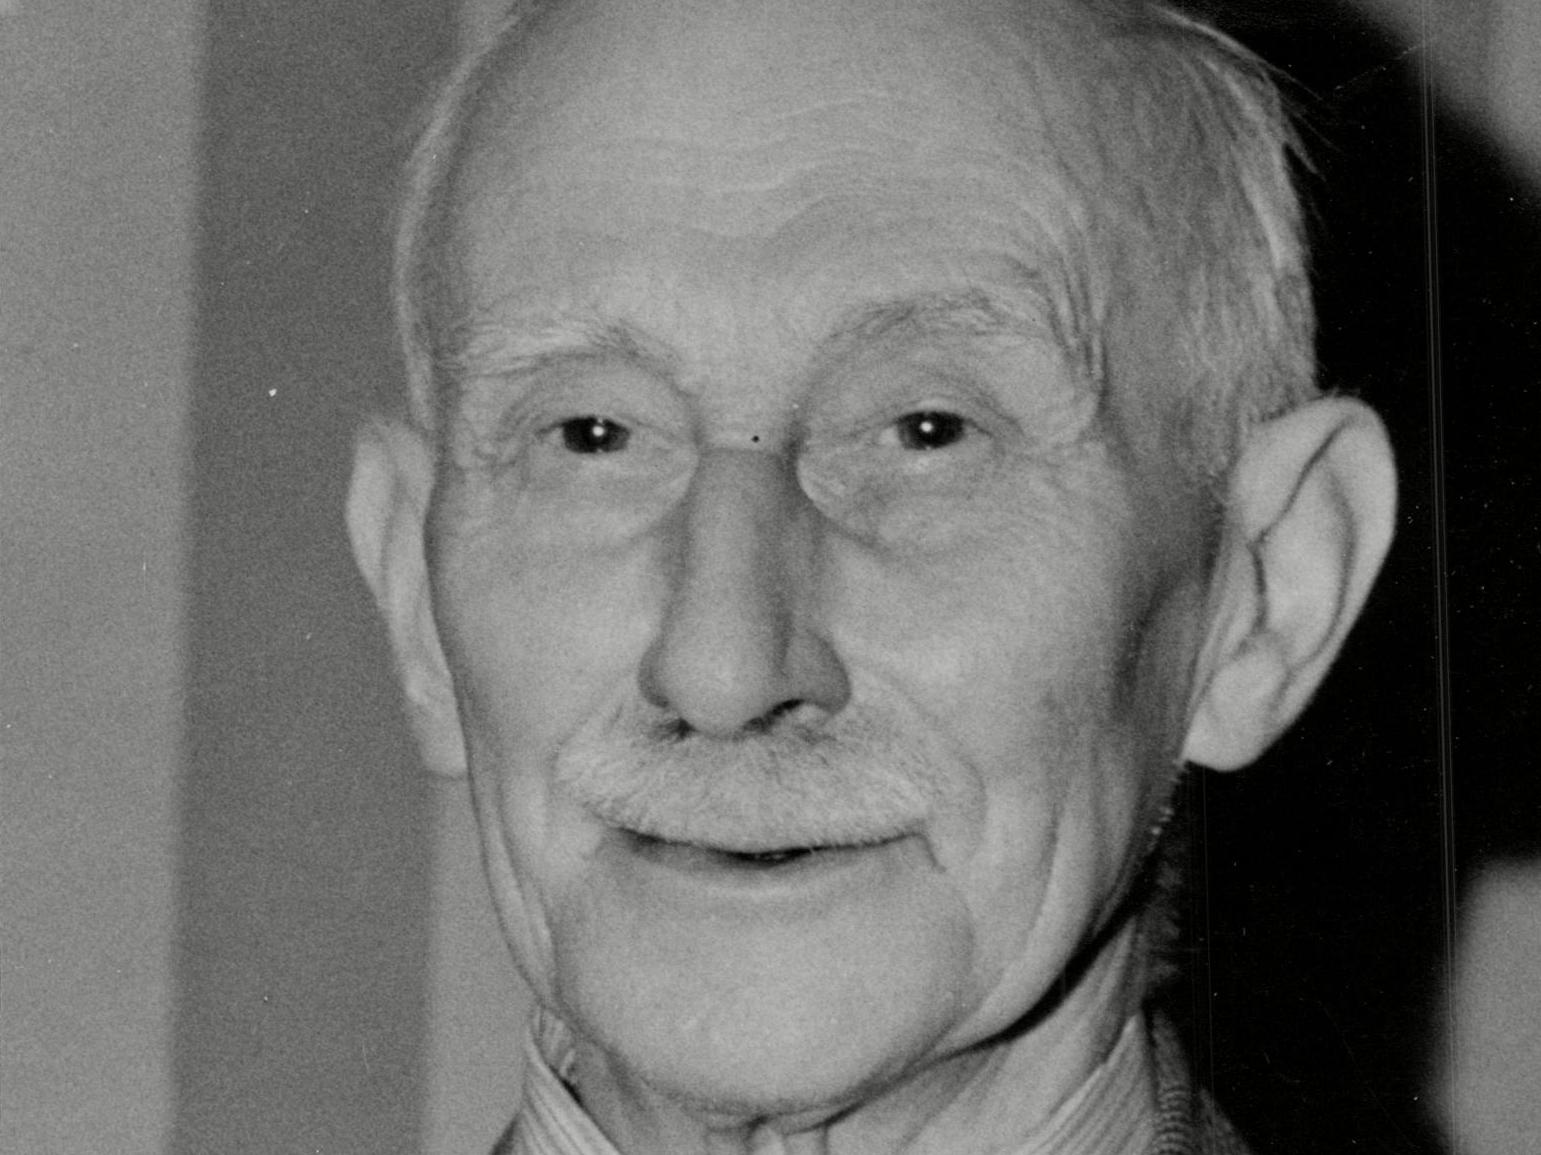 Herbert Cecil Booth, the inventor of the vacuum cleaner